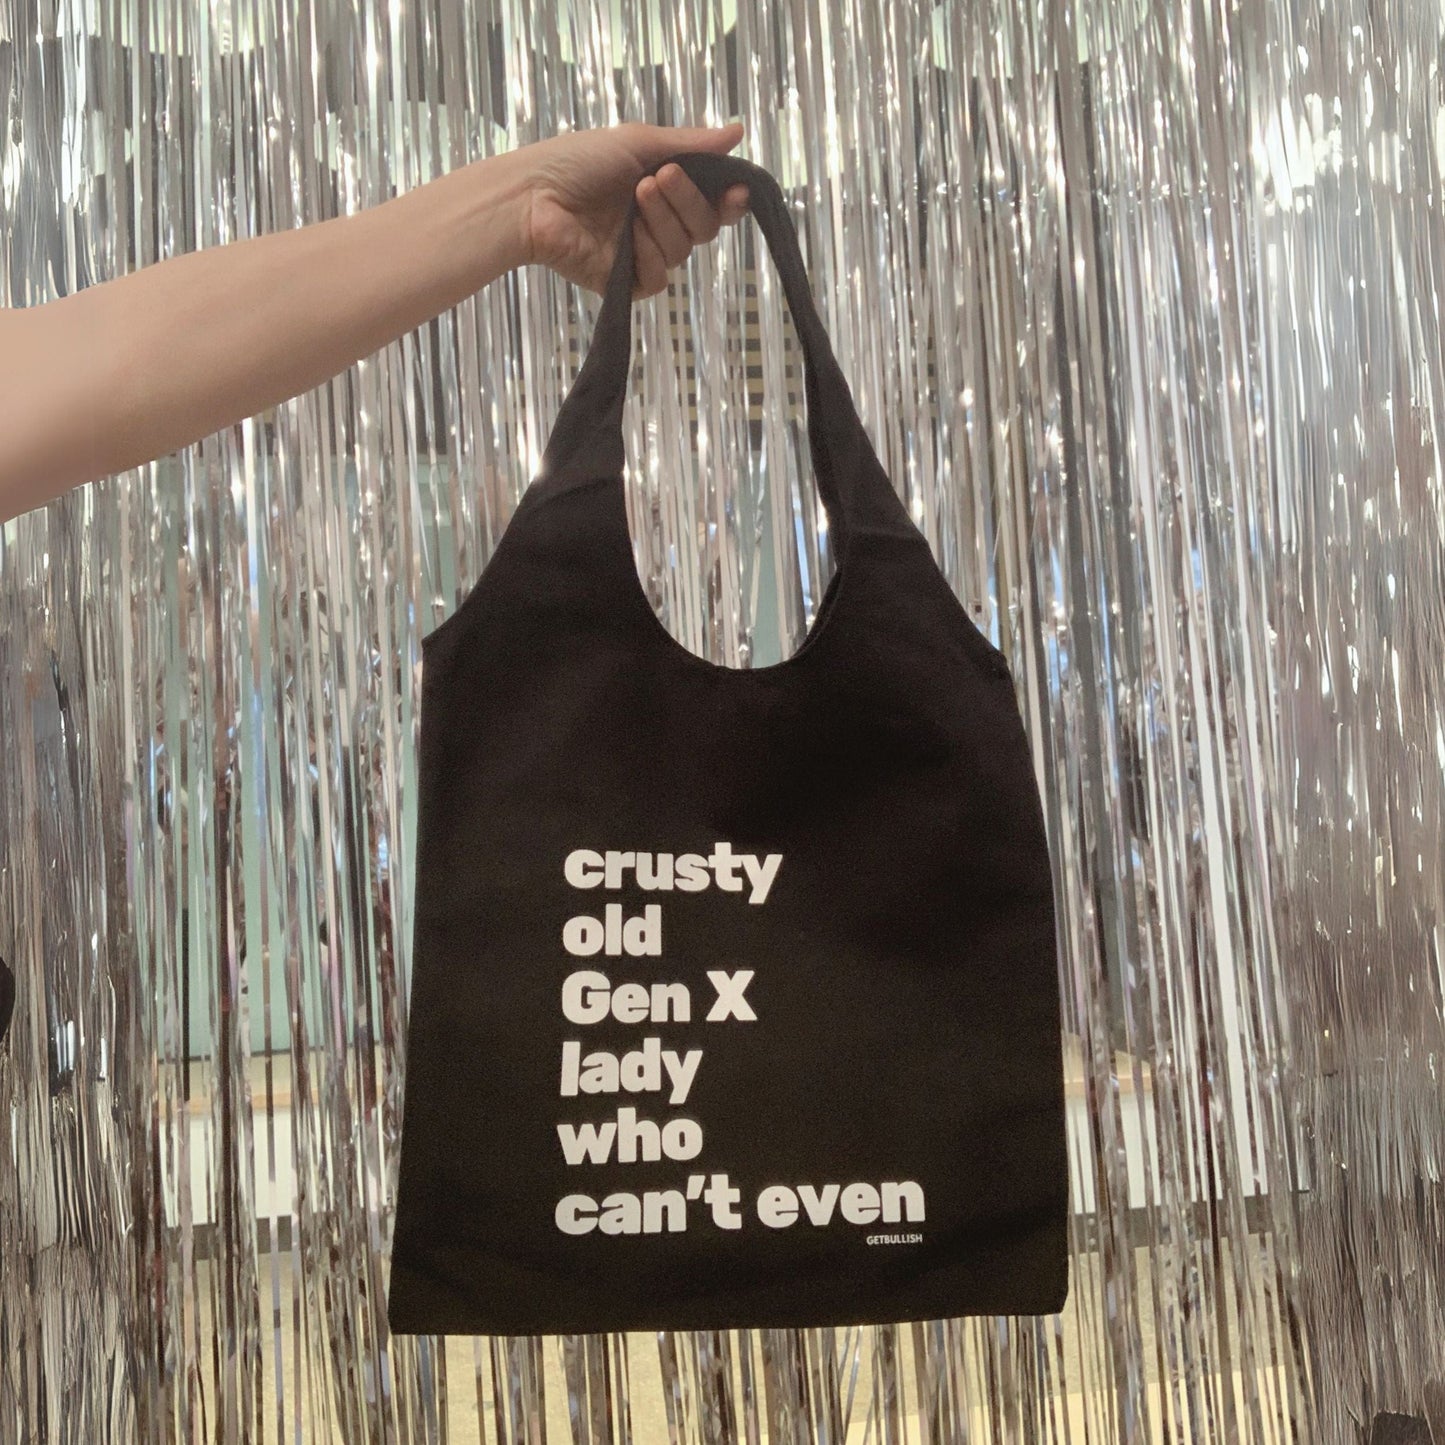 Crusty Old Gen X Lady Who Can't Even Slouchy Canvas Tote in Black